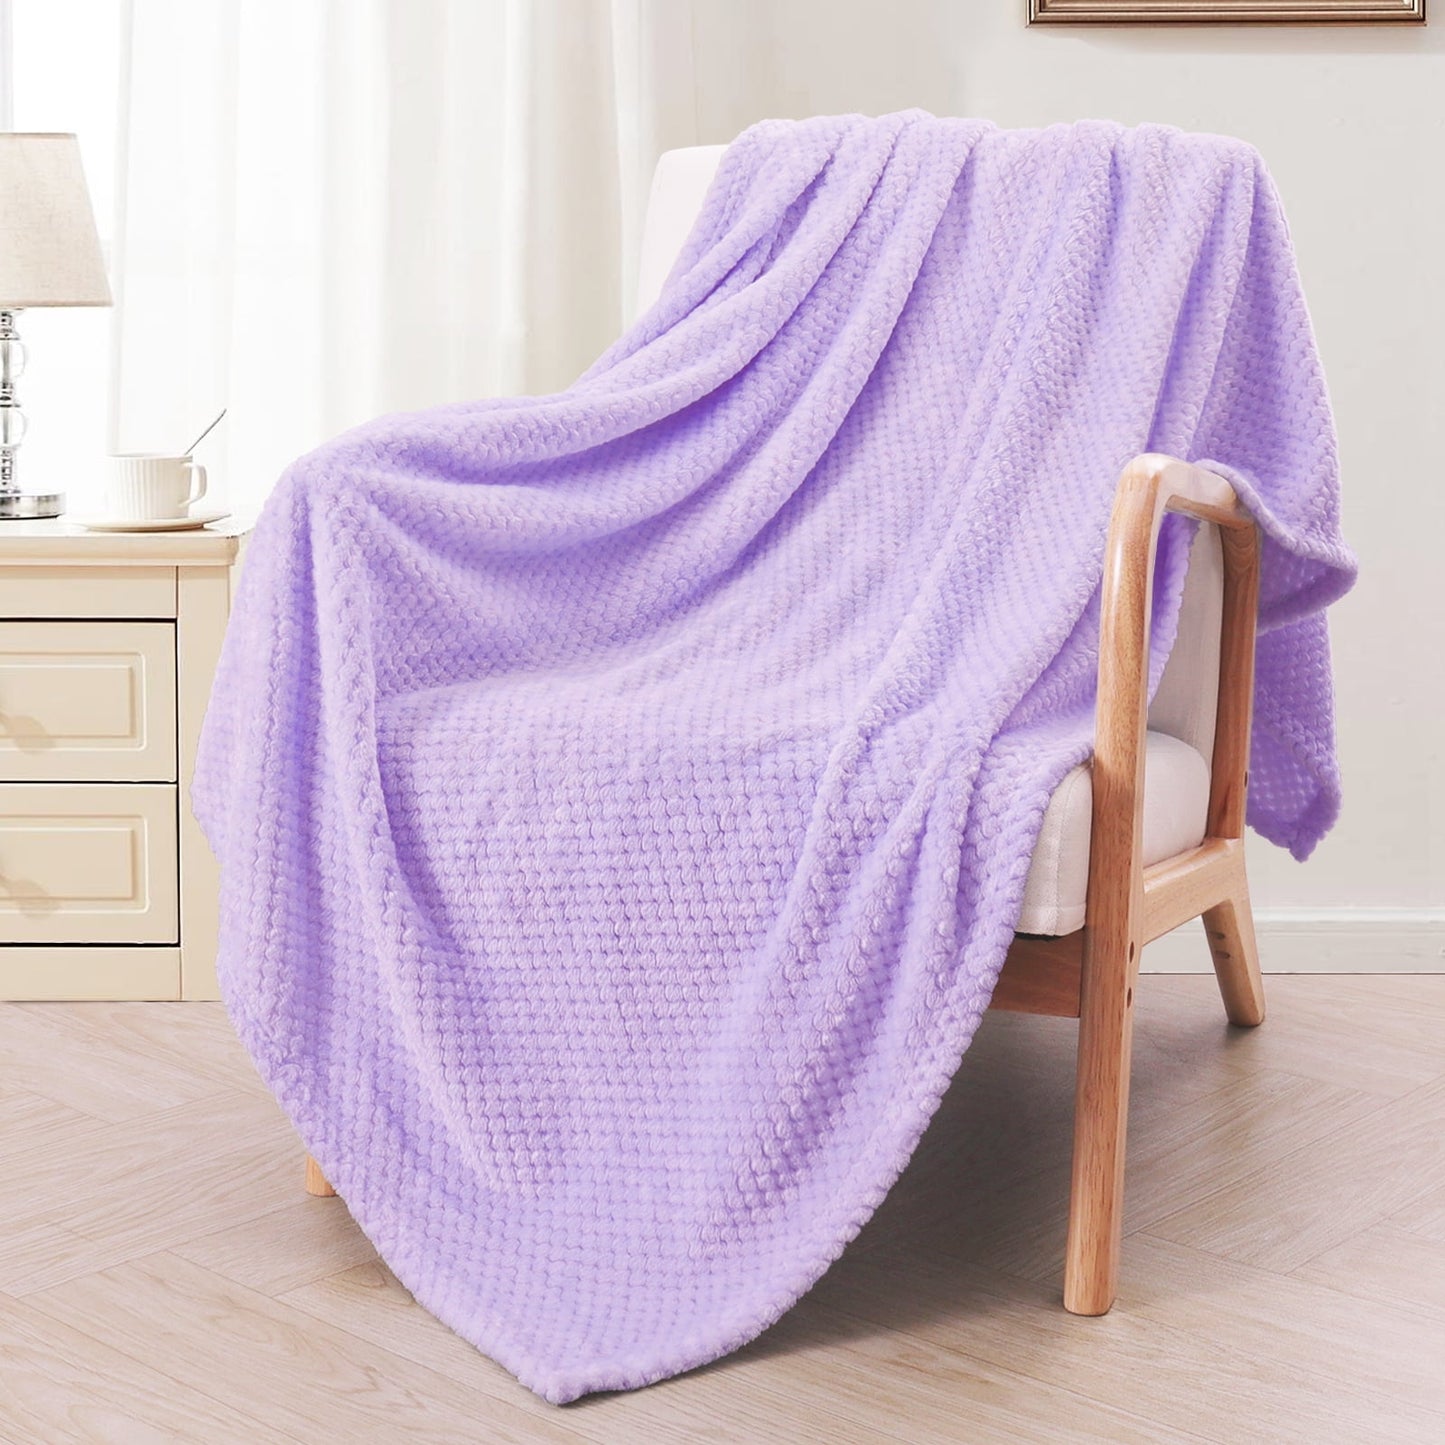 Exclusivo Mezcla Waffle Textured Extra Large Fleece Blanket, Super Soft and Warm Throw Blanket for Couch, Sofa and Bed (Lilac Purple, 50x70 inches)-Cozy, Fuzzy and Lightweight